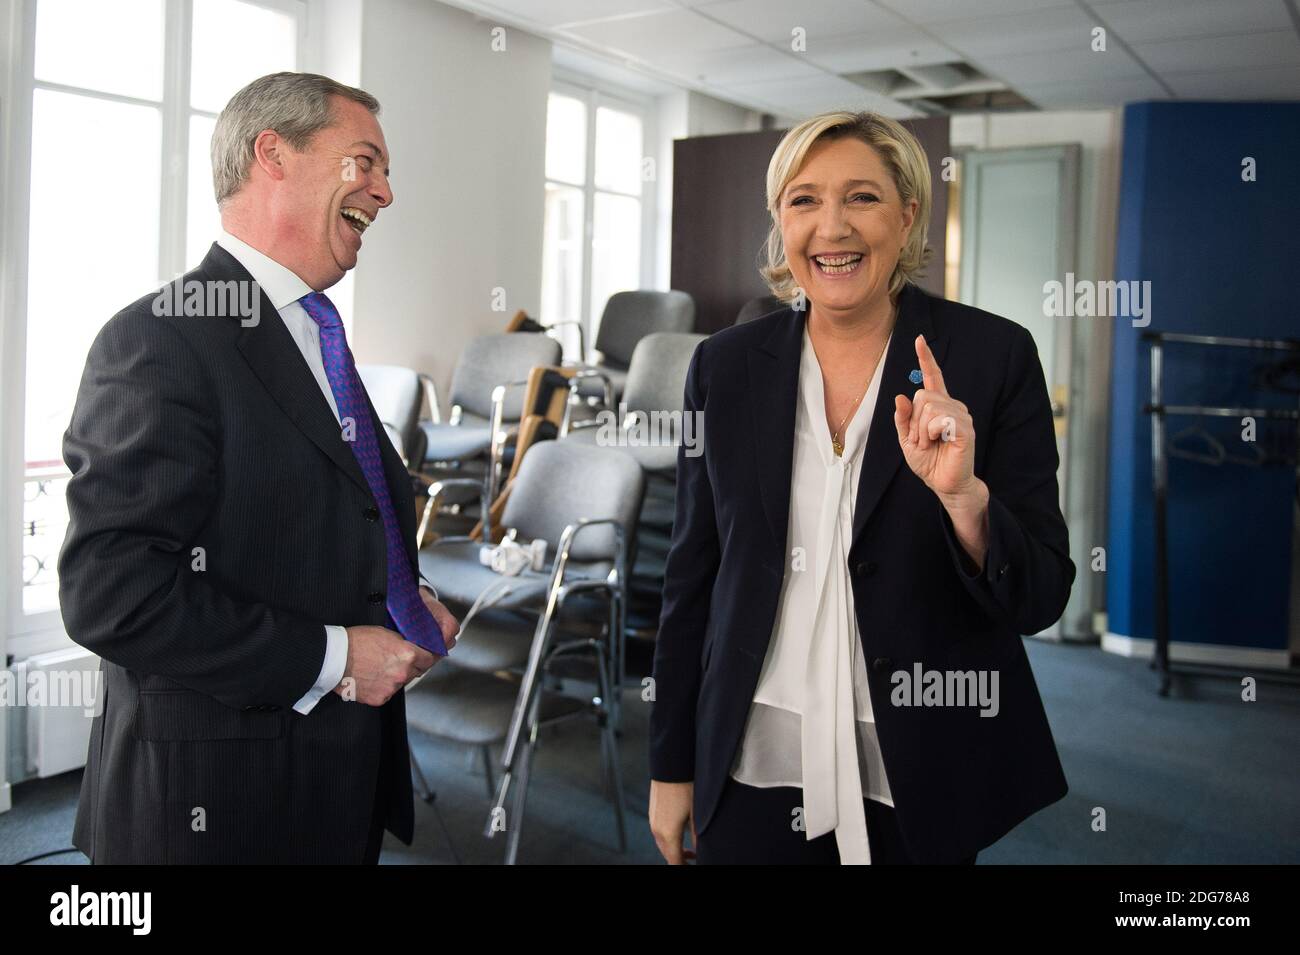 Exclusive - LBC presenter Nigel Farage interviews Marine Le Pen in Paris  for his weeknight national radio show in Paris on March 12, 2017. The full  interview will be broadcast in The